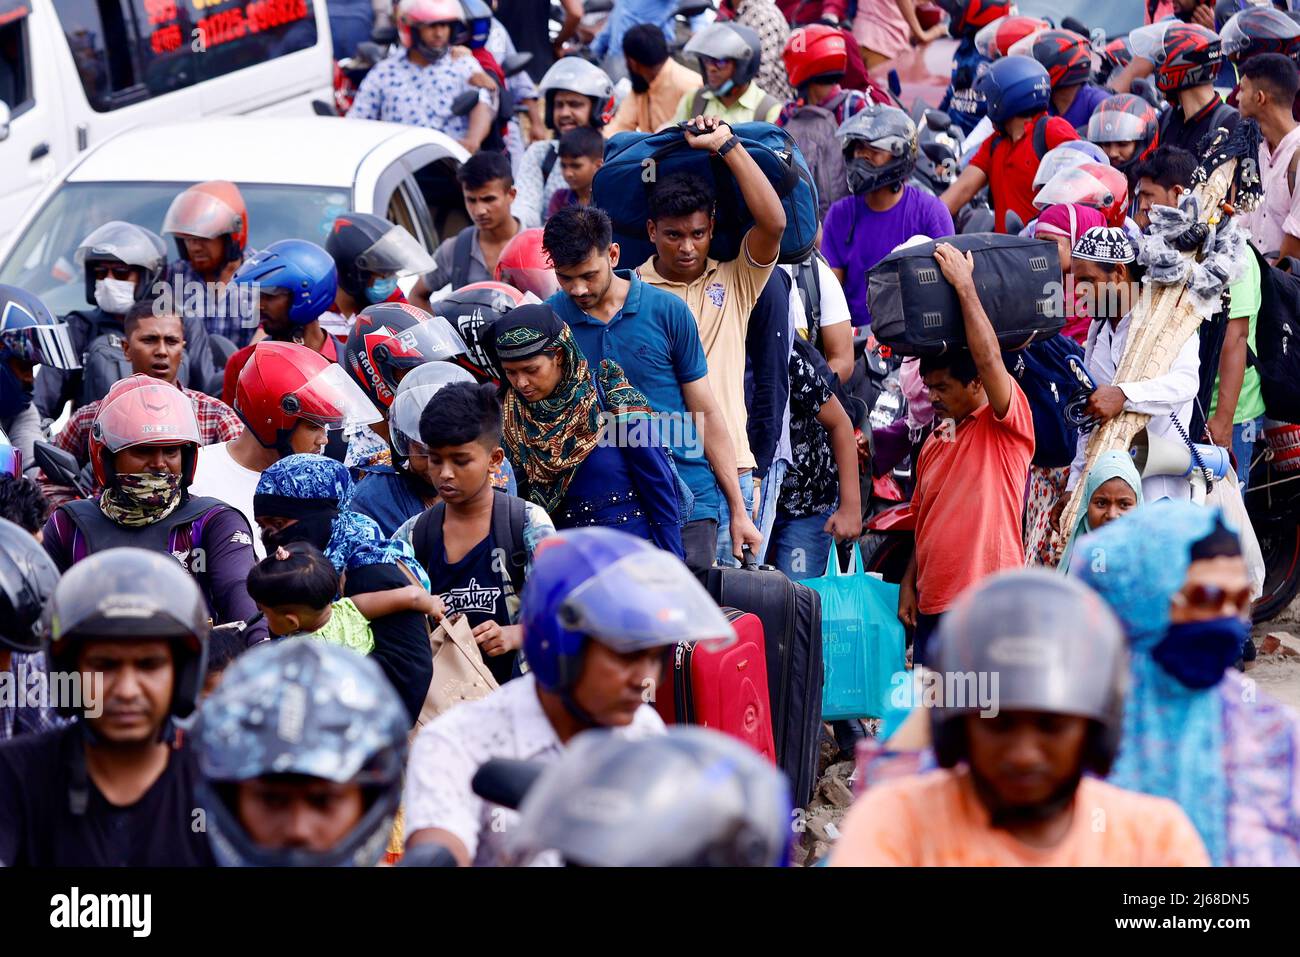 People get into ferries at Bangladesh Inland Water Transport Corporation (BIWTC) Shimulia Ferry Ghat to go home ahead of Eid al-fitr, in Munshiganj, Bangladesh, April 29, 2022. REUTERS/Mohammad Ponir Hossain Stock Photo